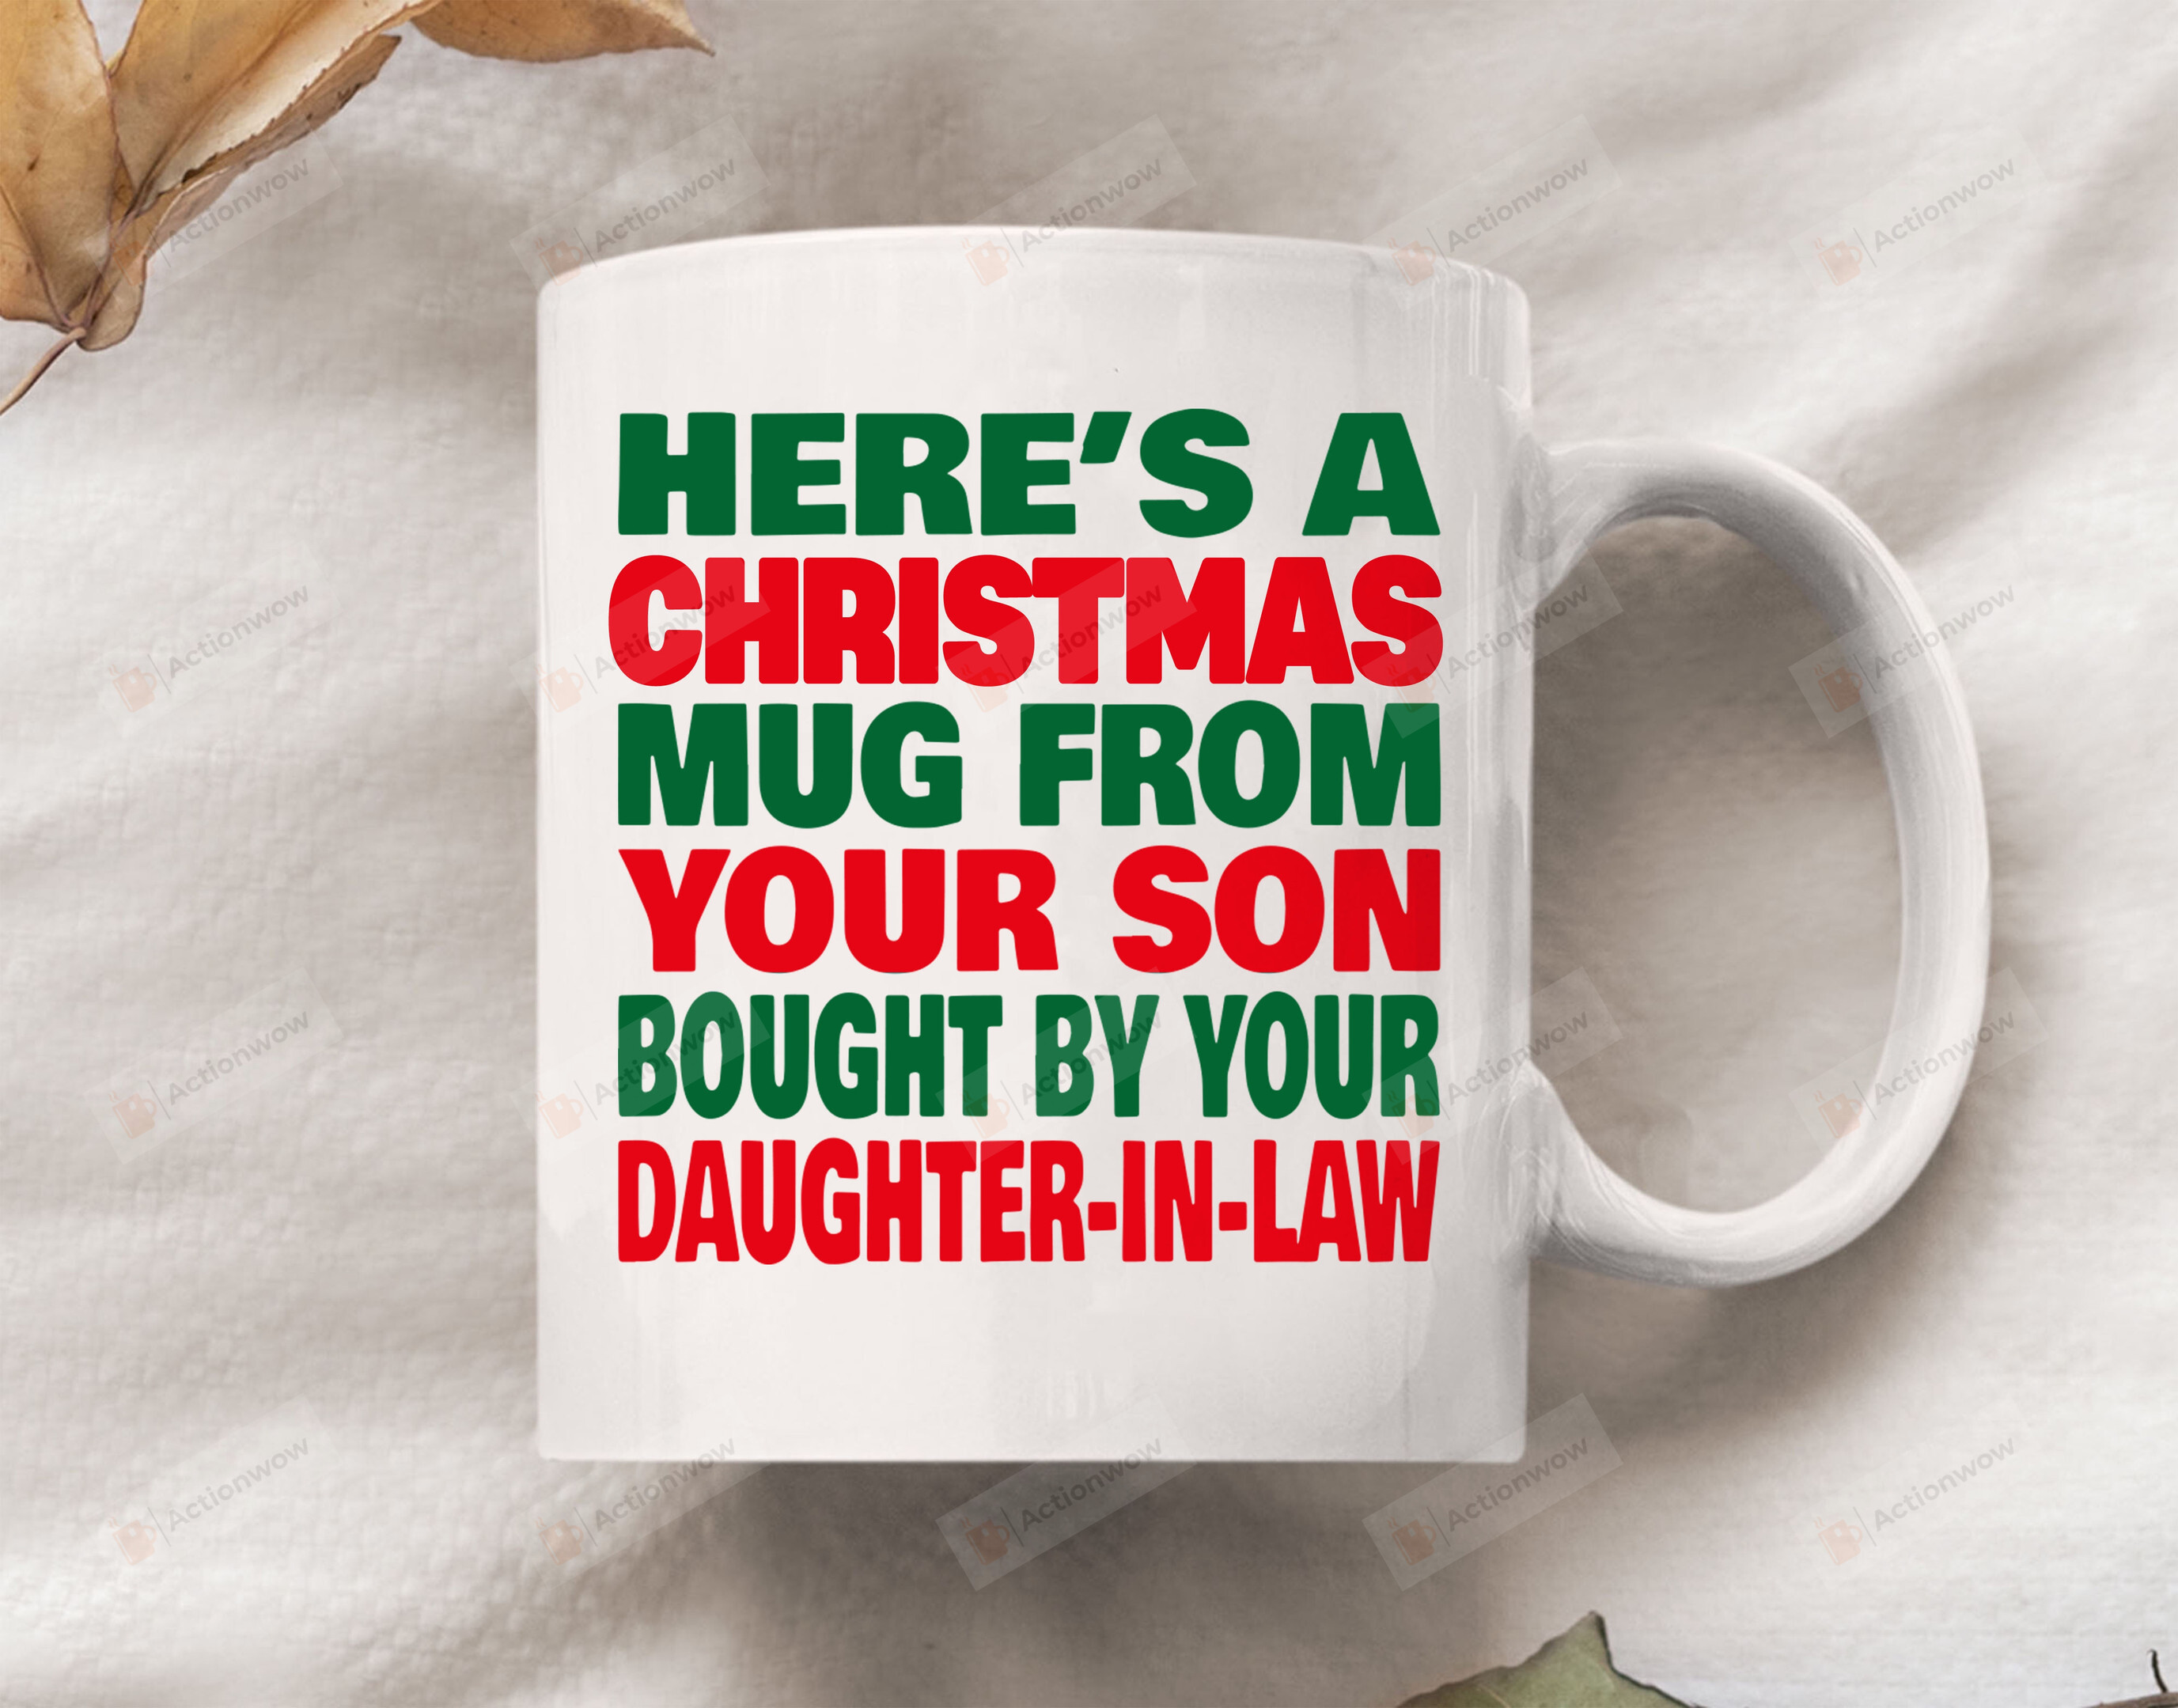 Here's A Christmas Mug From Your Son Bought By Your Daughter-In-Law Mug, Funny Mug Gifts For Mother Father In Law On Christmas